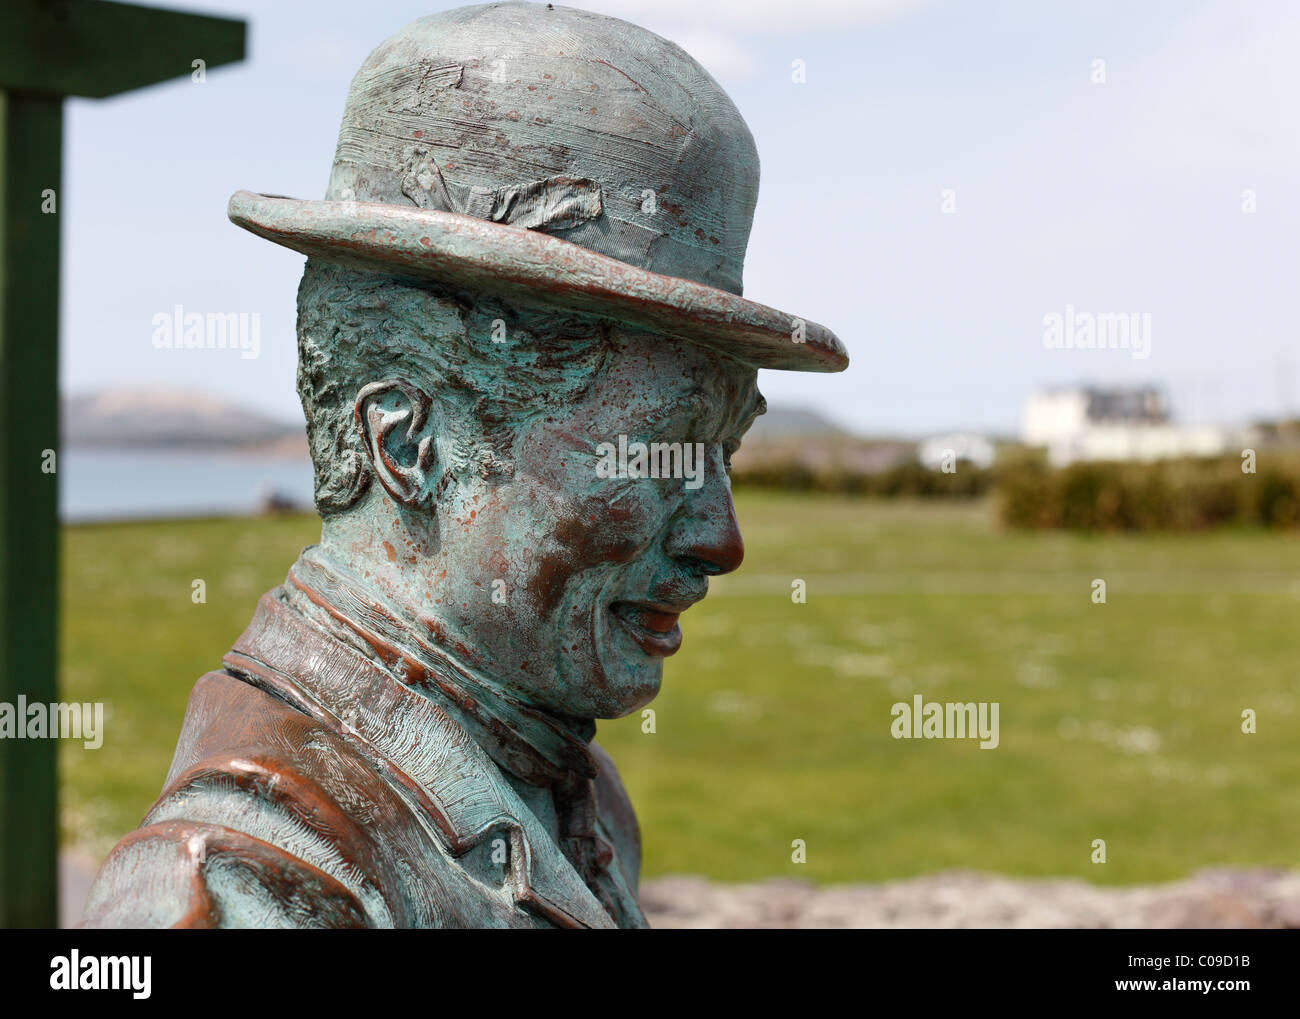 Monumento a Charlie Chaplin, 1998, Waterville, Ring of Kerry County Kerry, Irlanda Isole britanniche, Europa Foto Stock